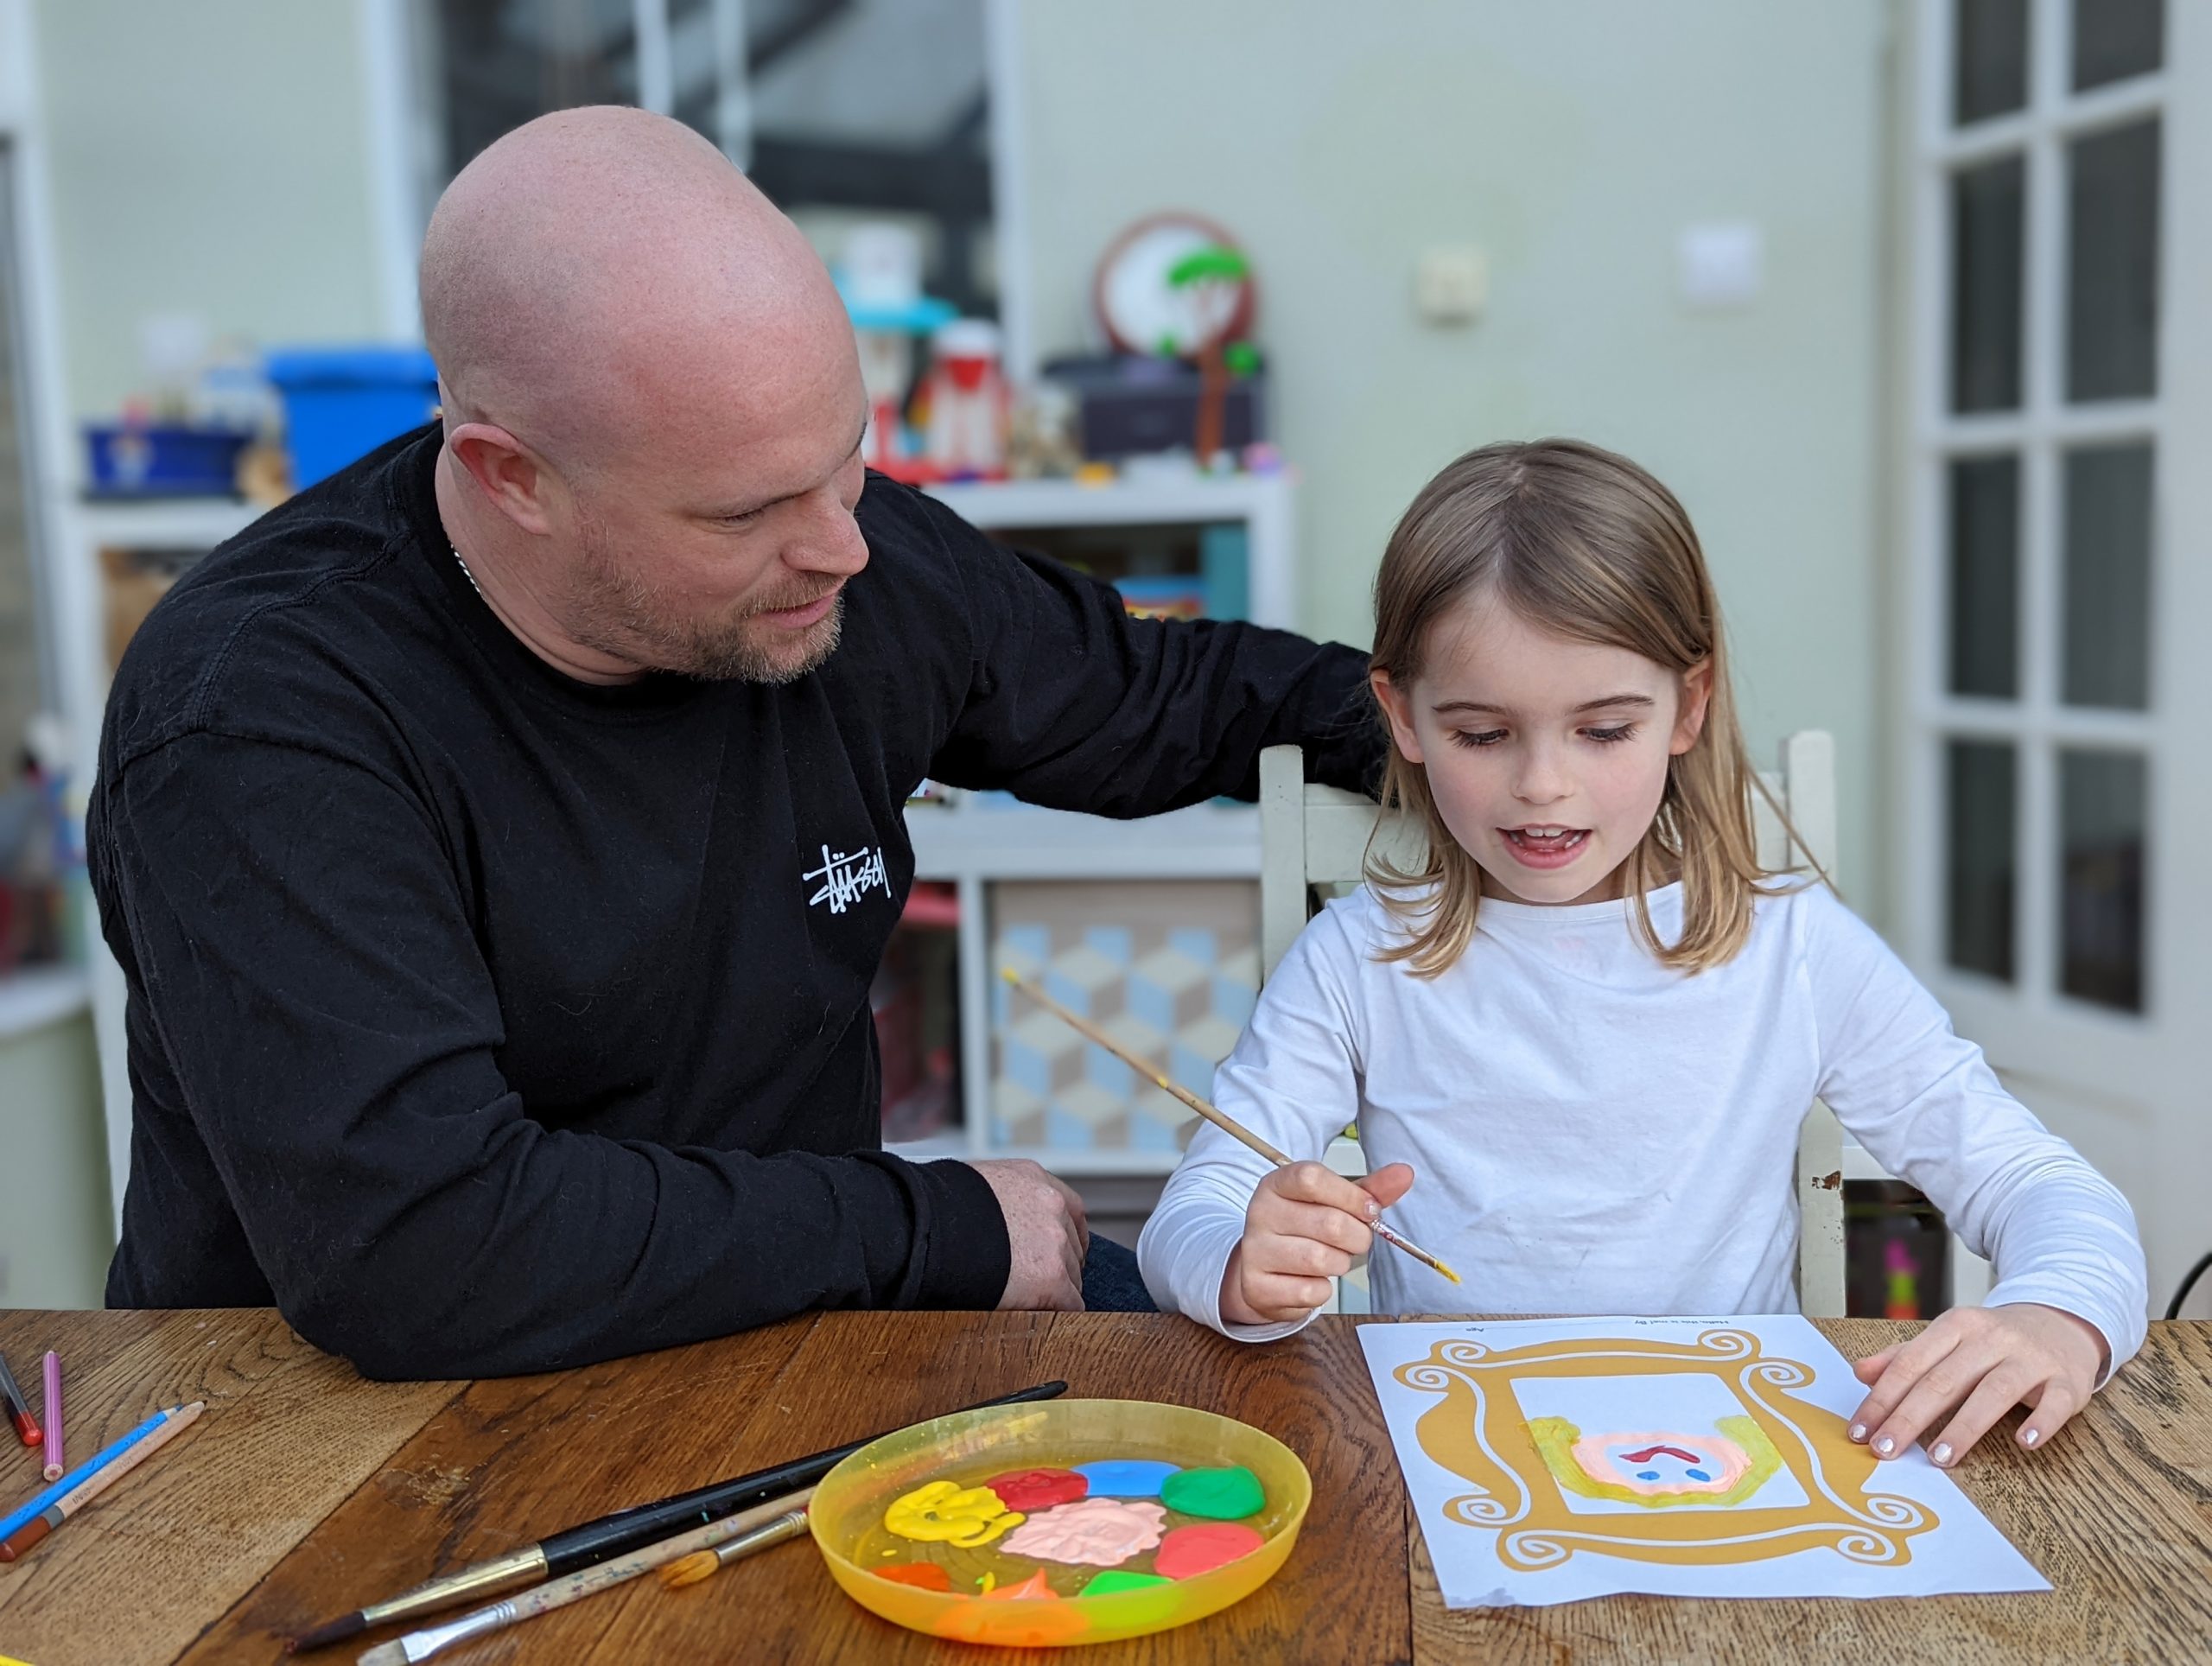 A father and daughter painting